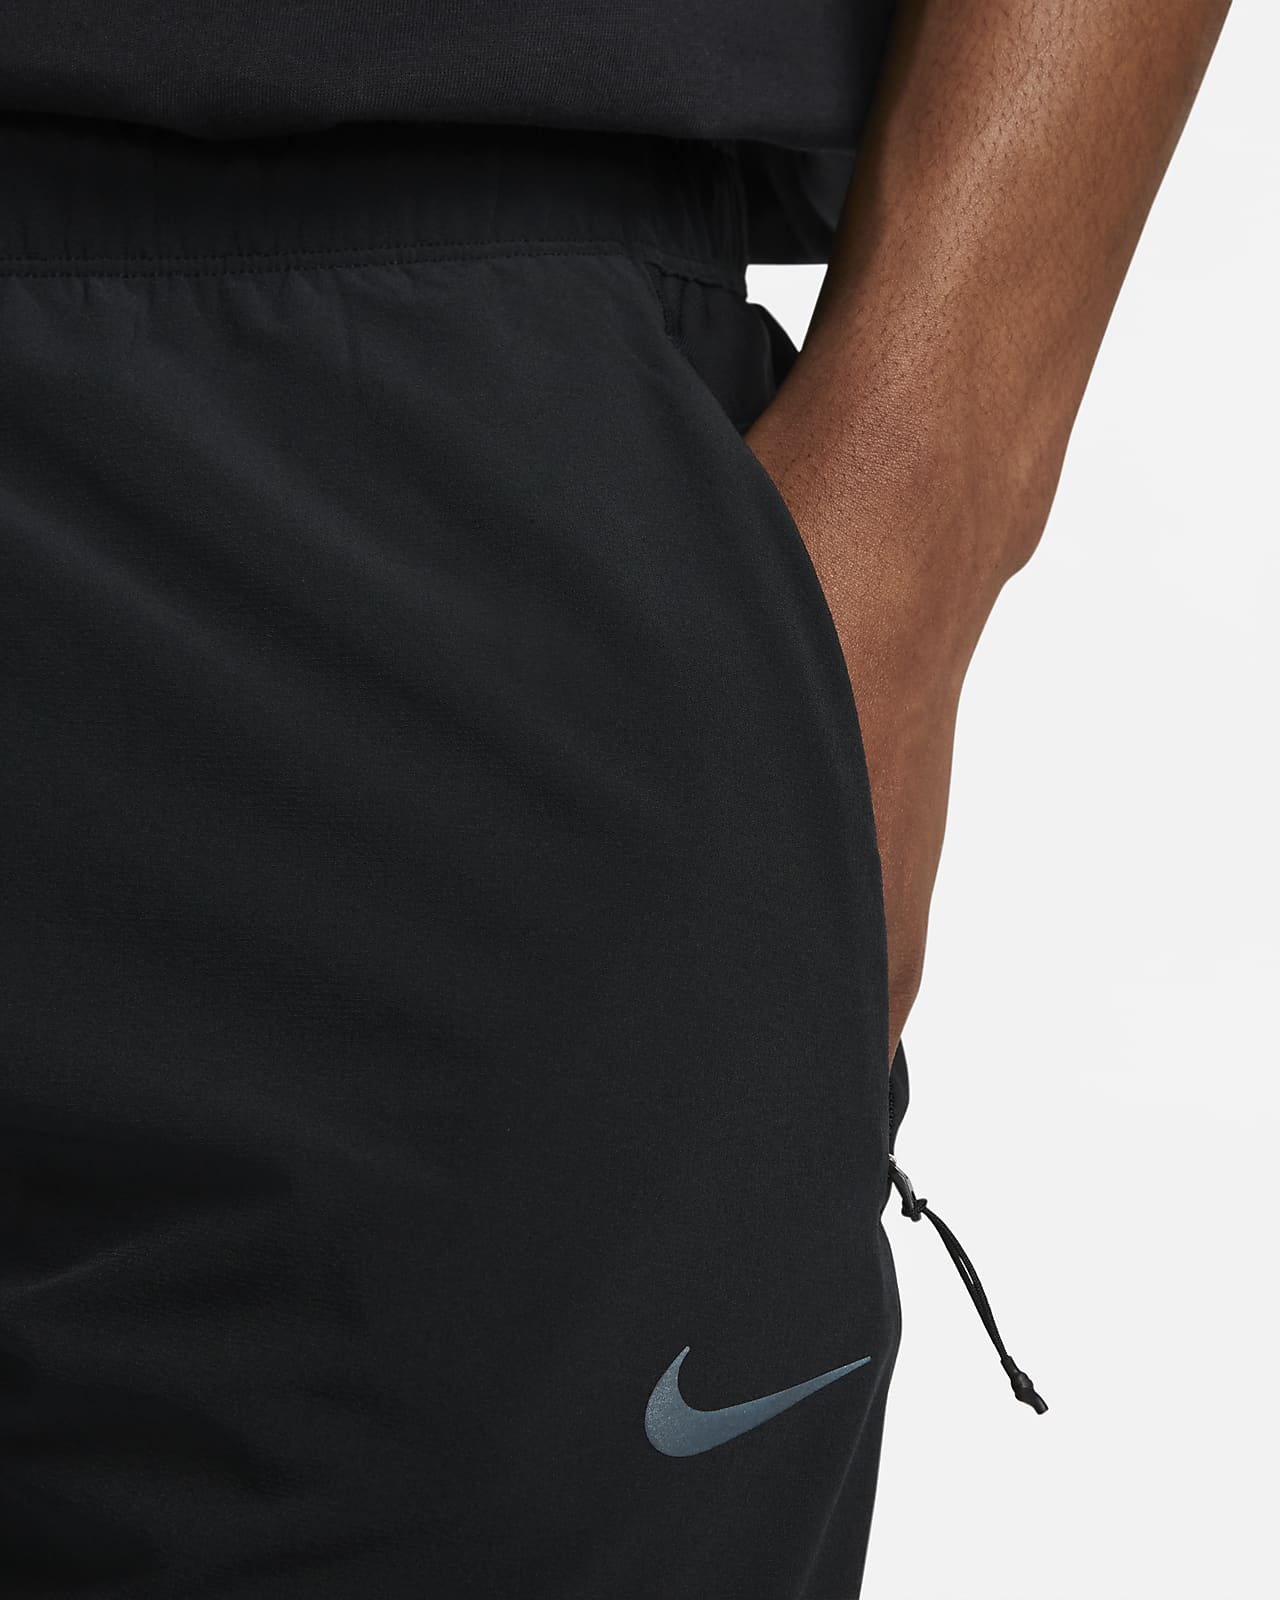 Stay comfortable and stylish with Nike Dri Fit Sweats for Women